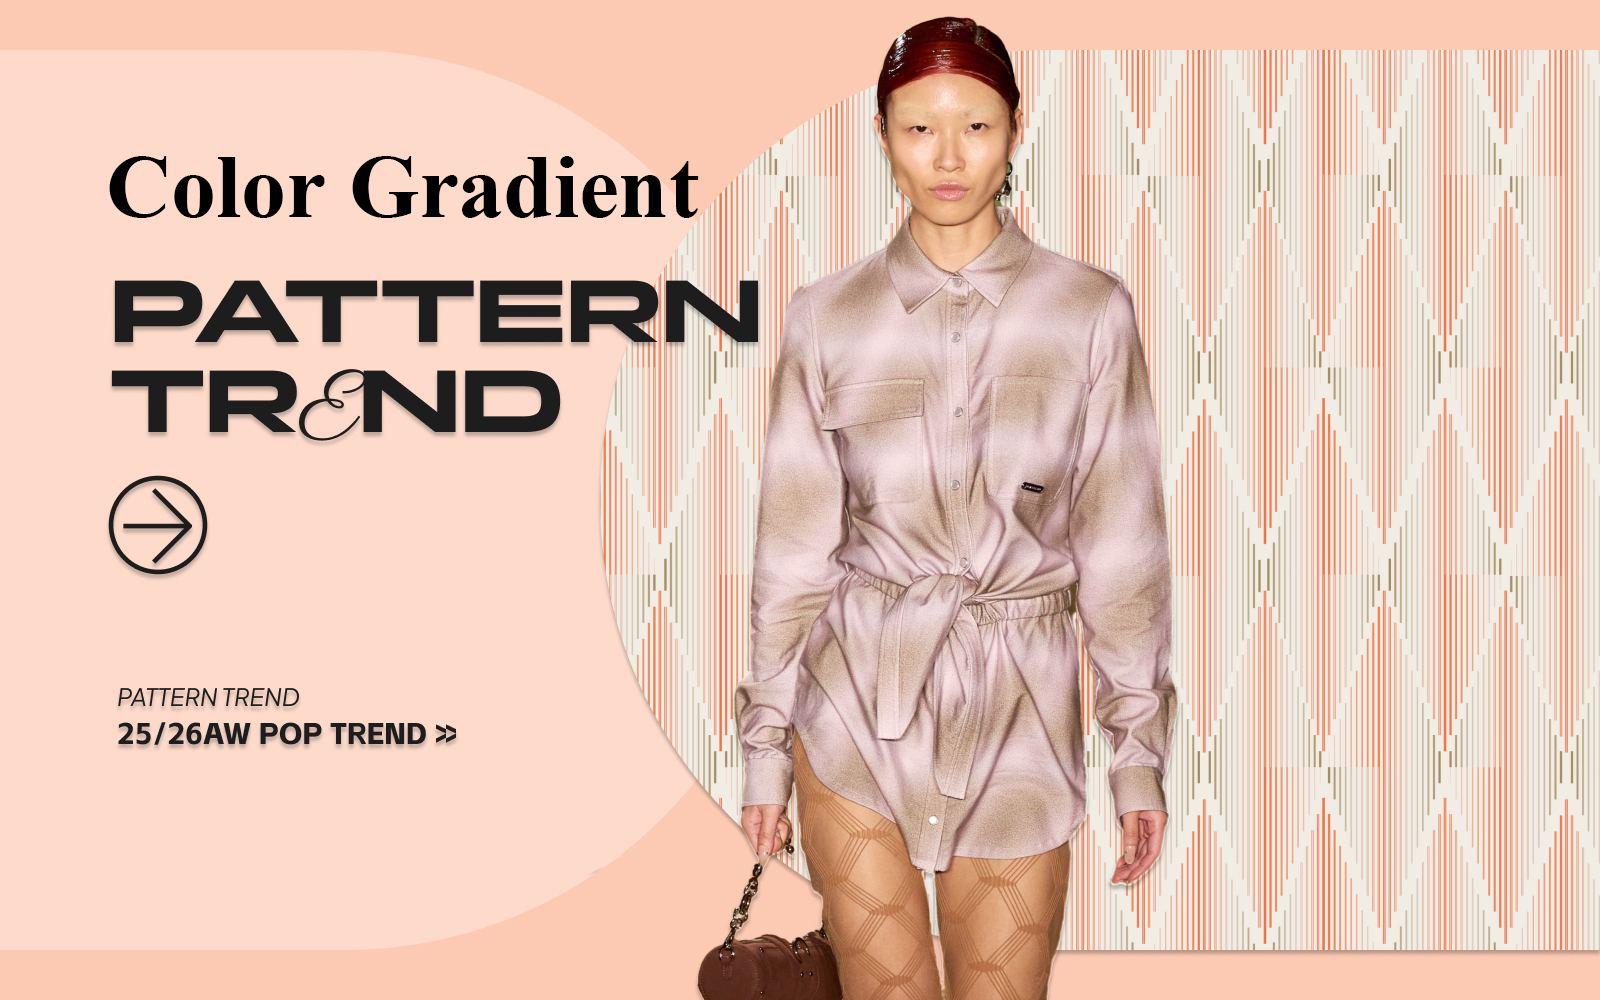 Color Gradient -- The Pattern Trend for Womenswear